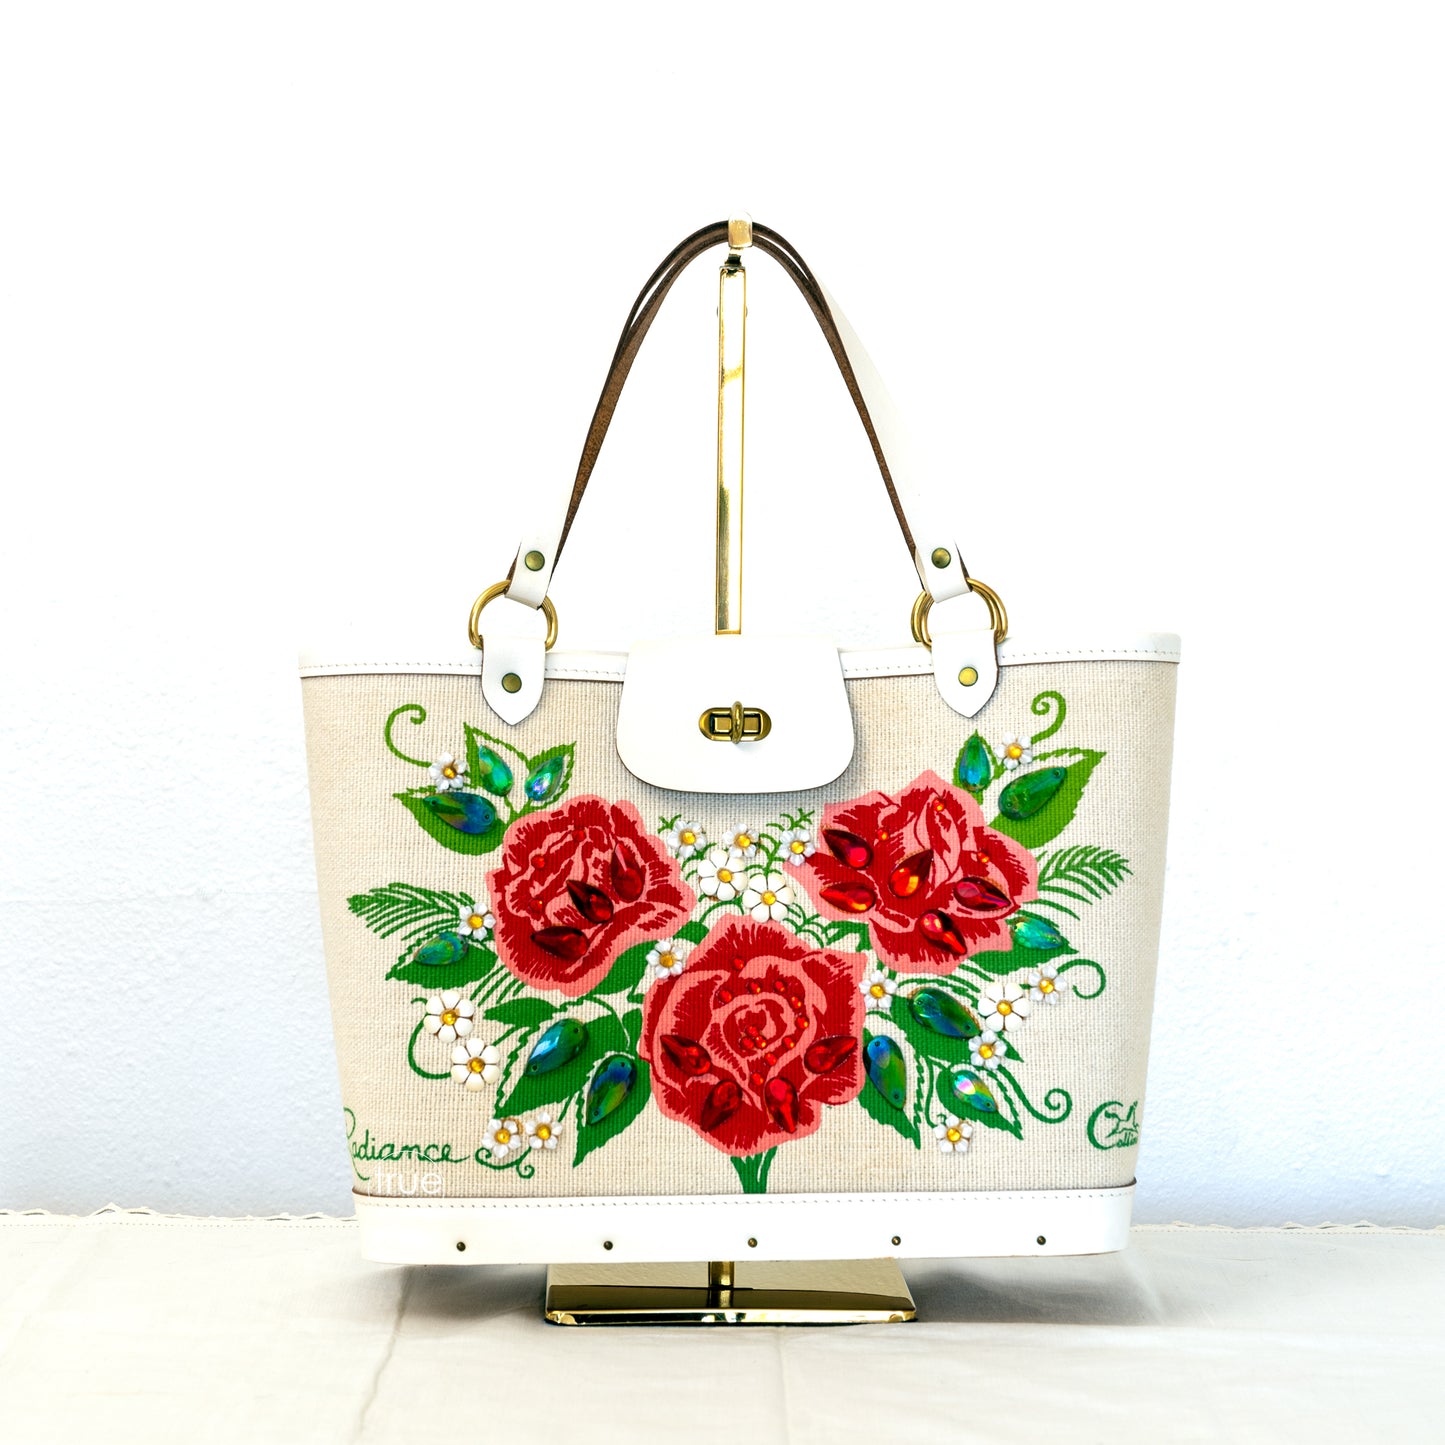 vintage 1960's purse ...deadstock ENID COLLINS of texas jeweled "Radiance" roses purse w/ original tag